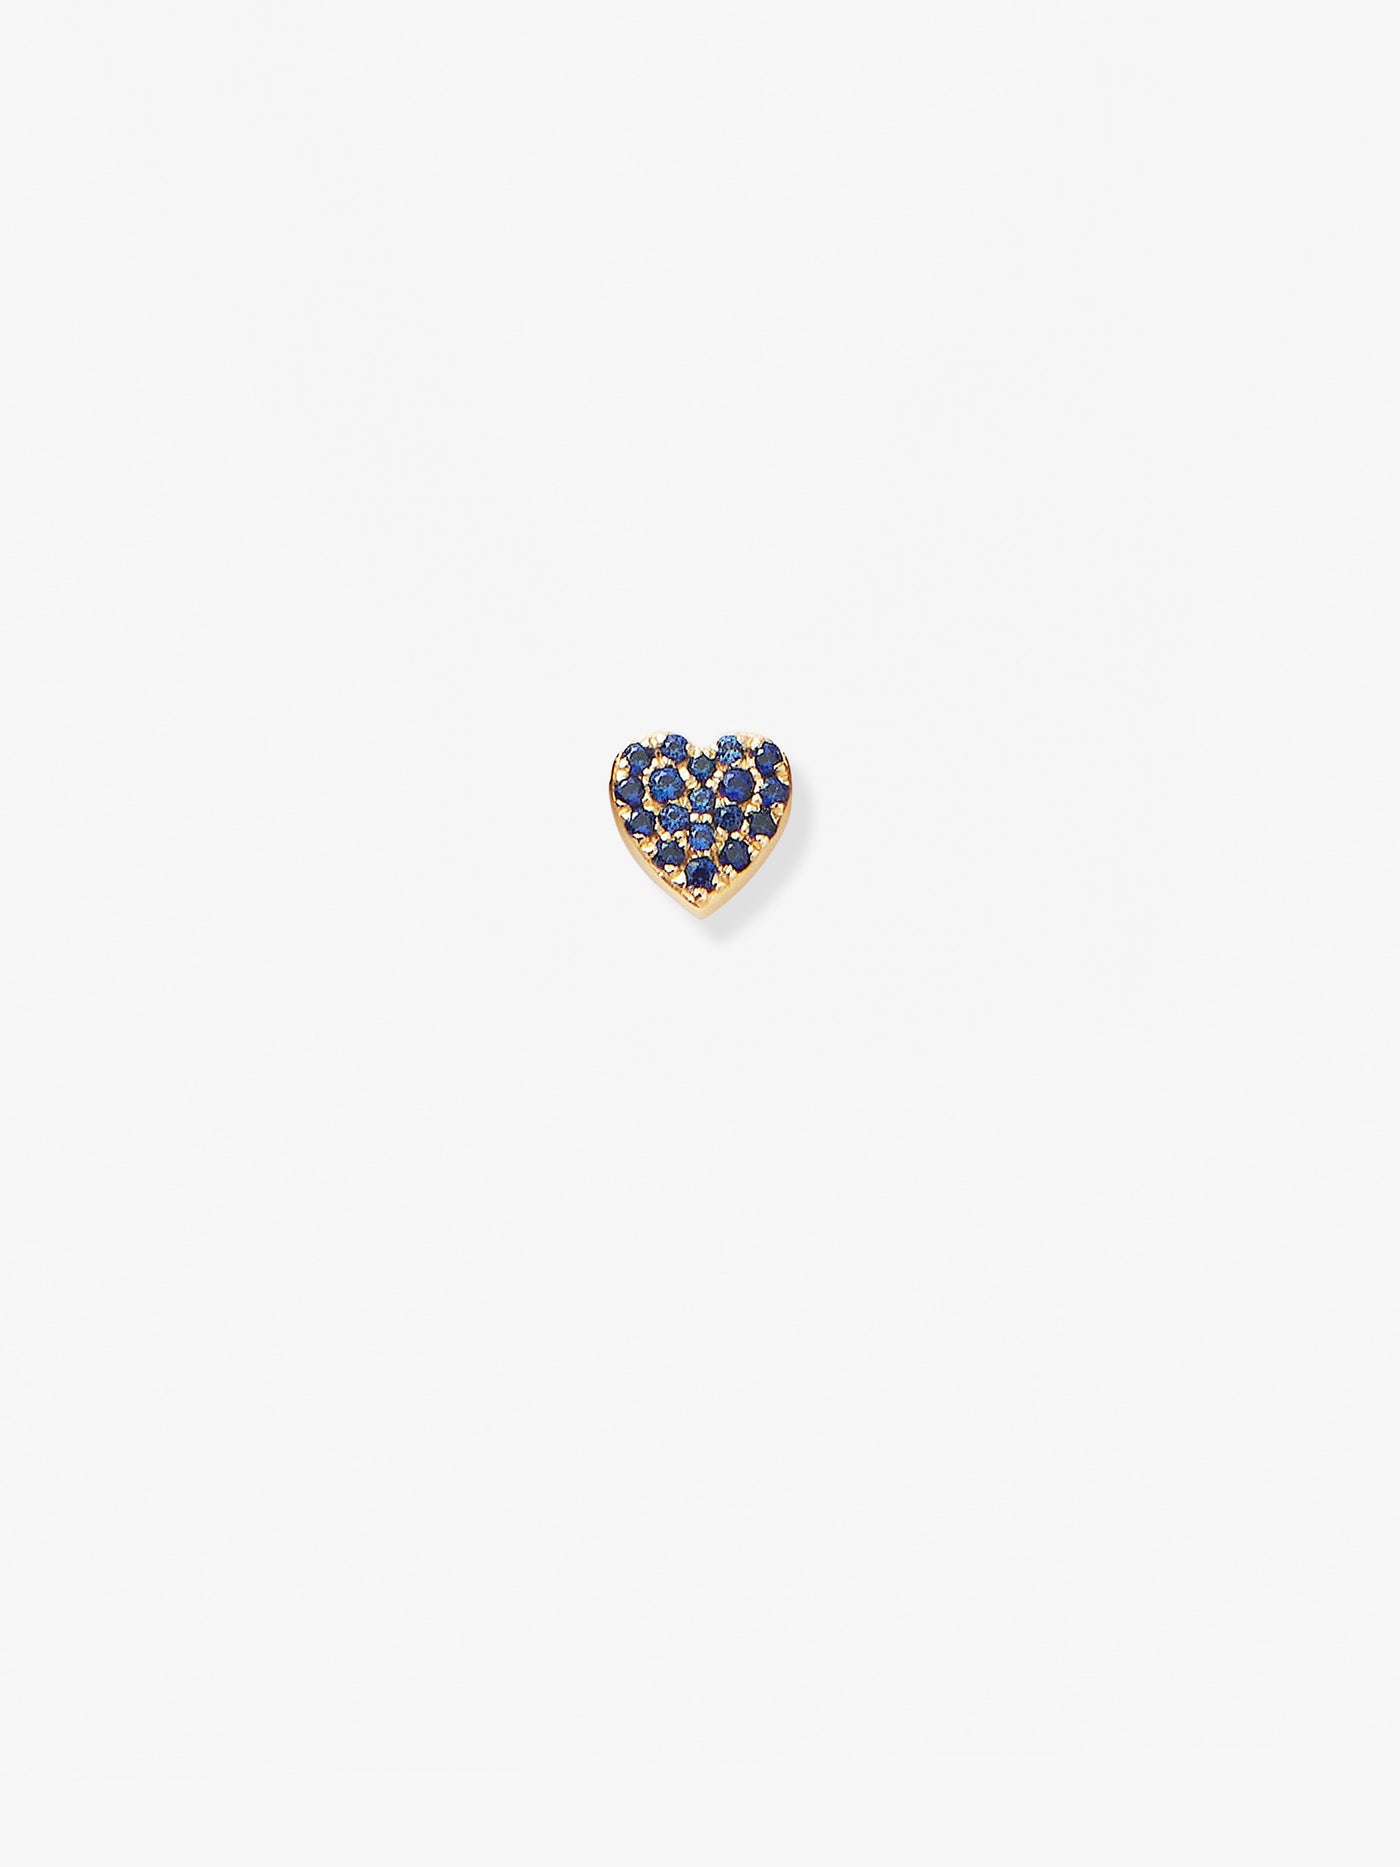 Heart Stud Single Earring in Blue Sapphire and 18k Gold